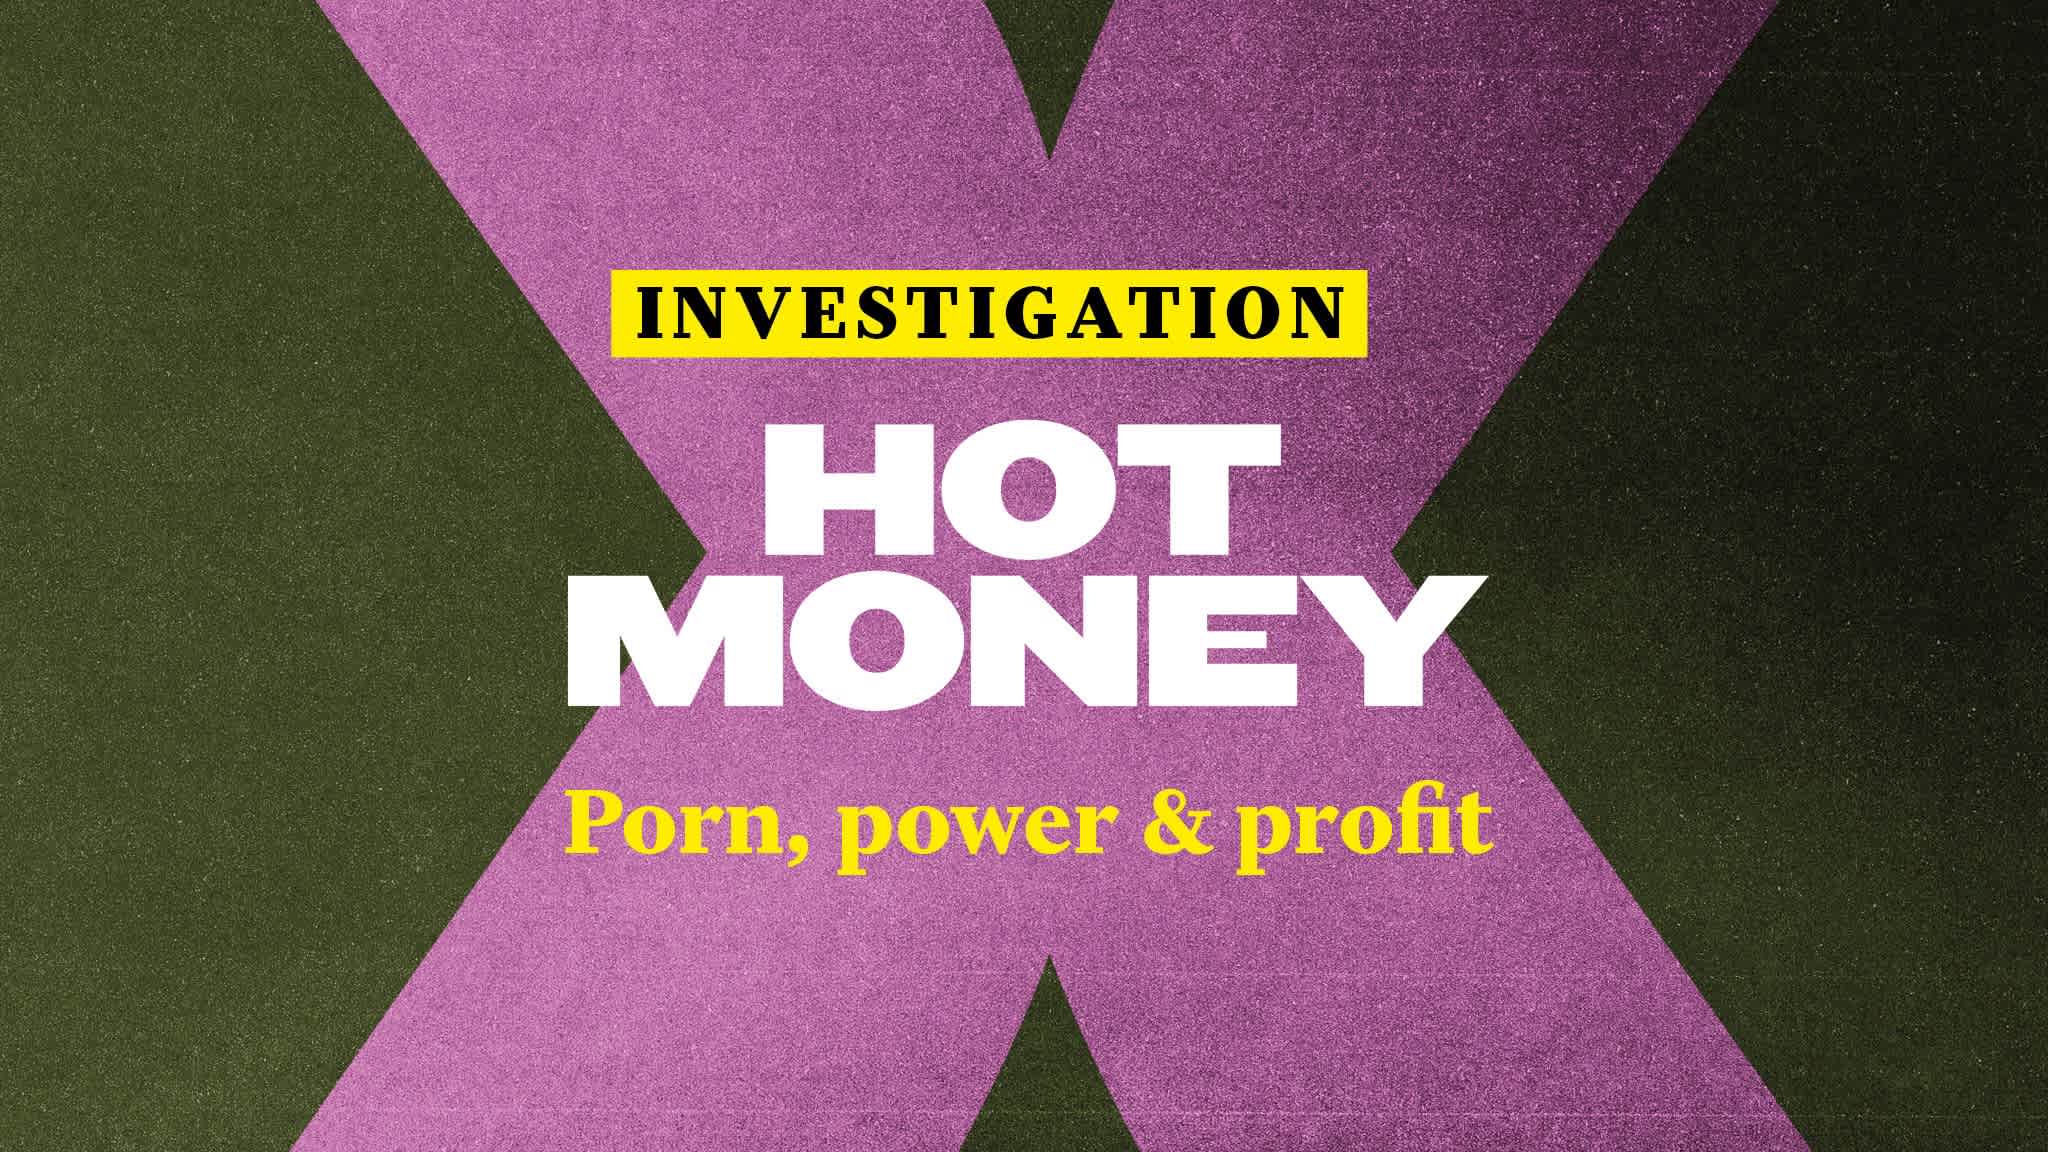 Episode 5: The billionaire who took on the porn industry